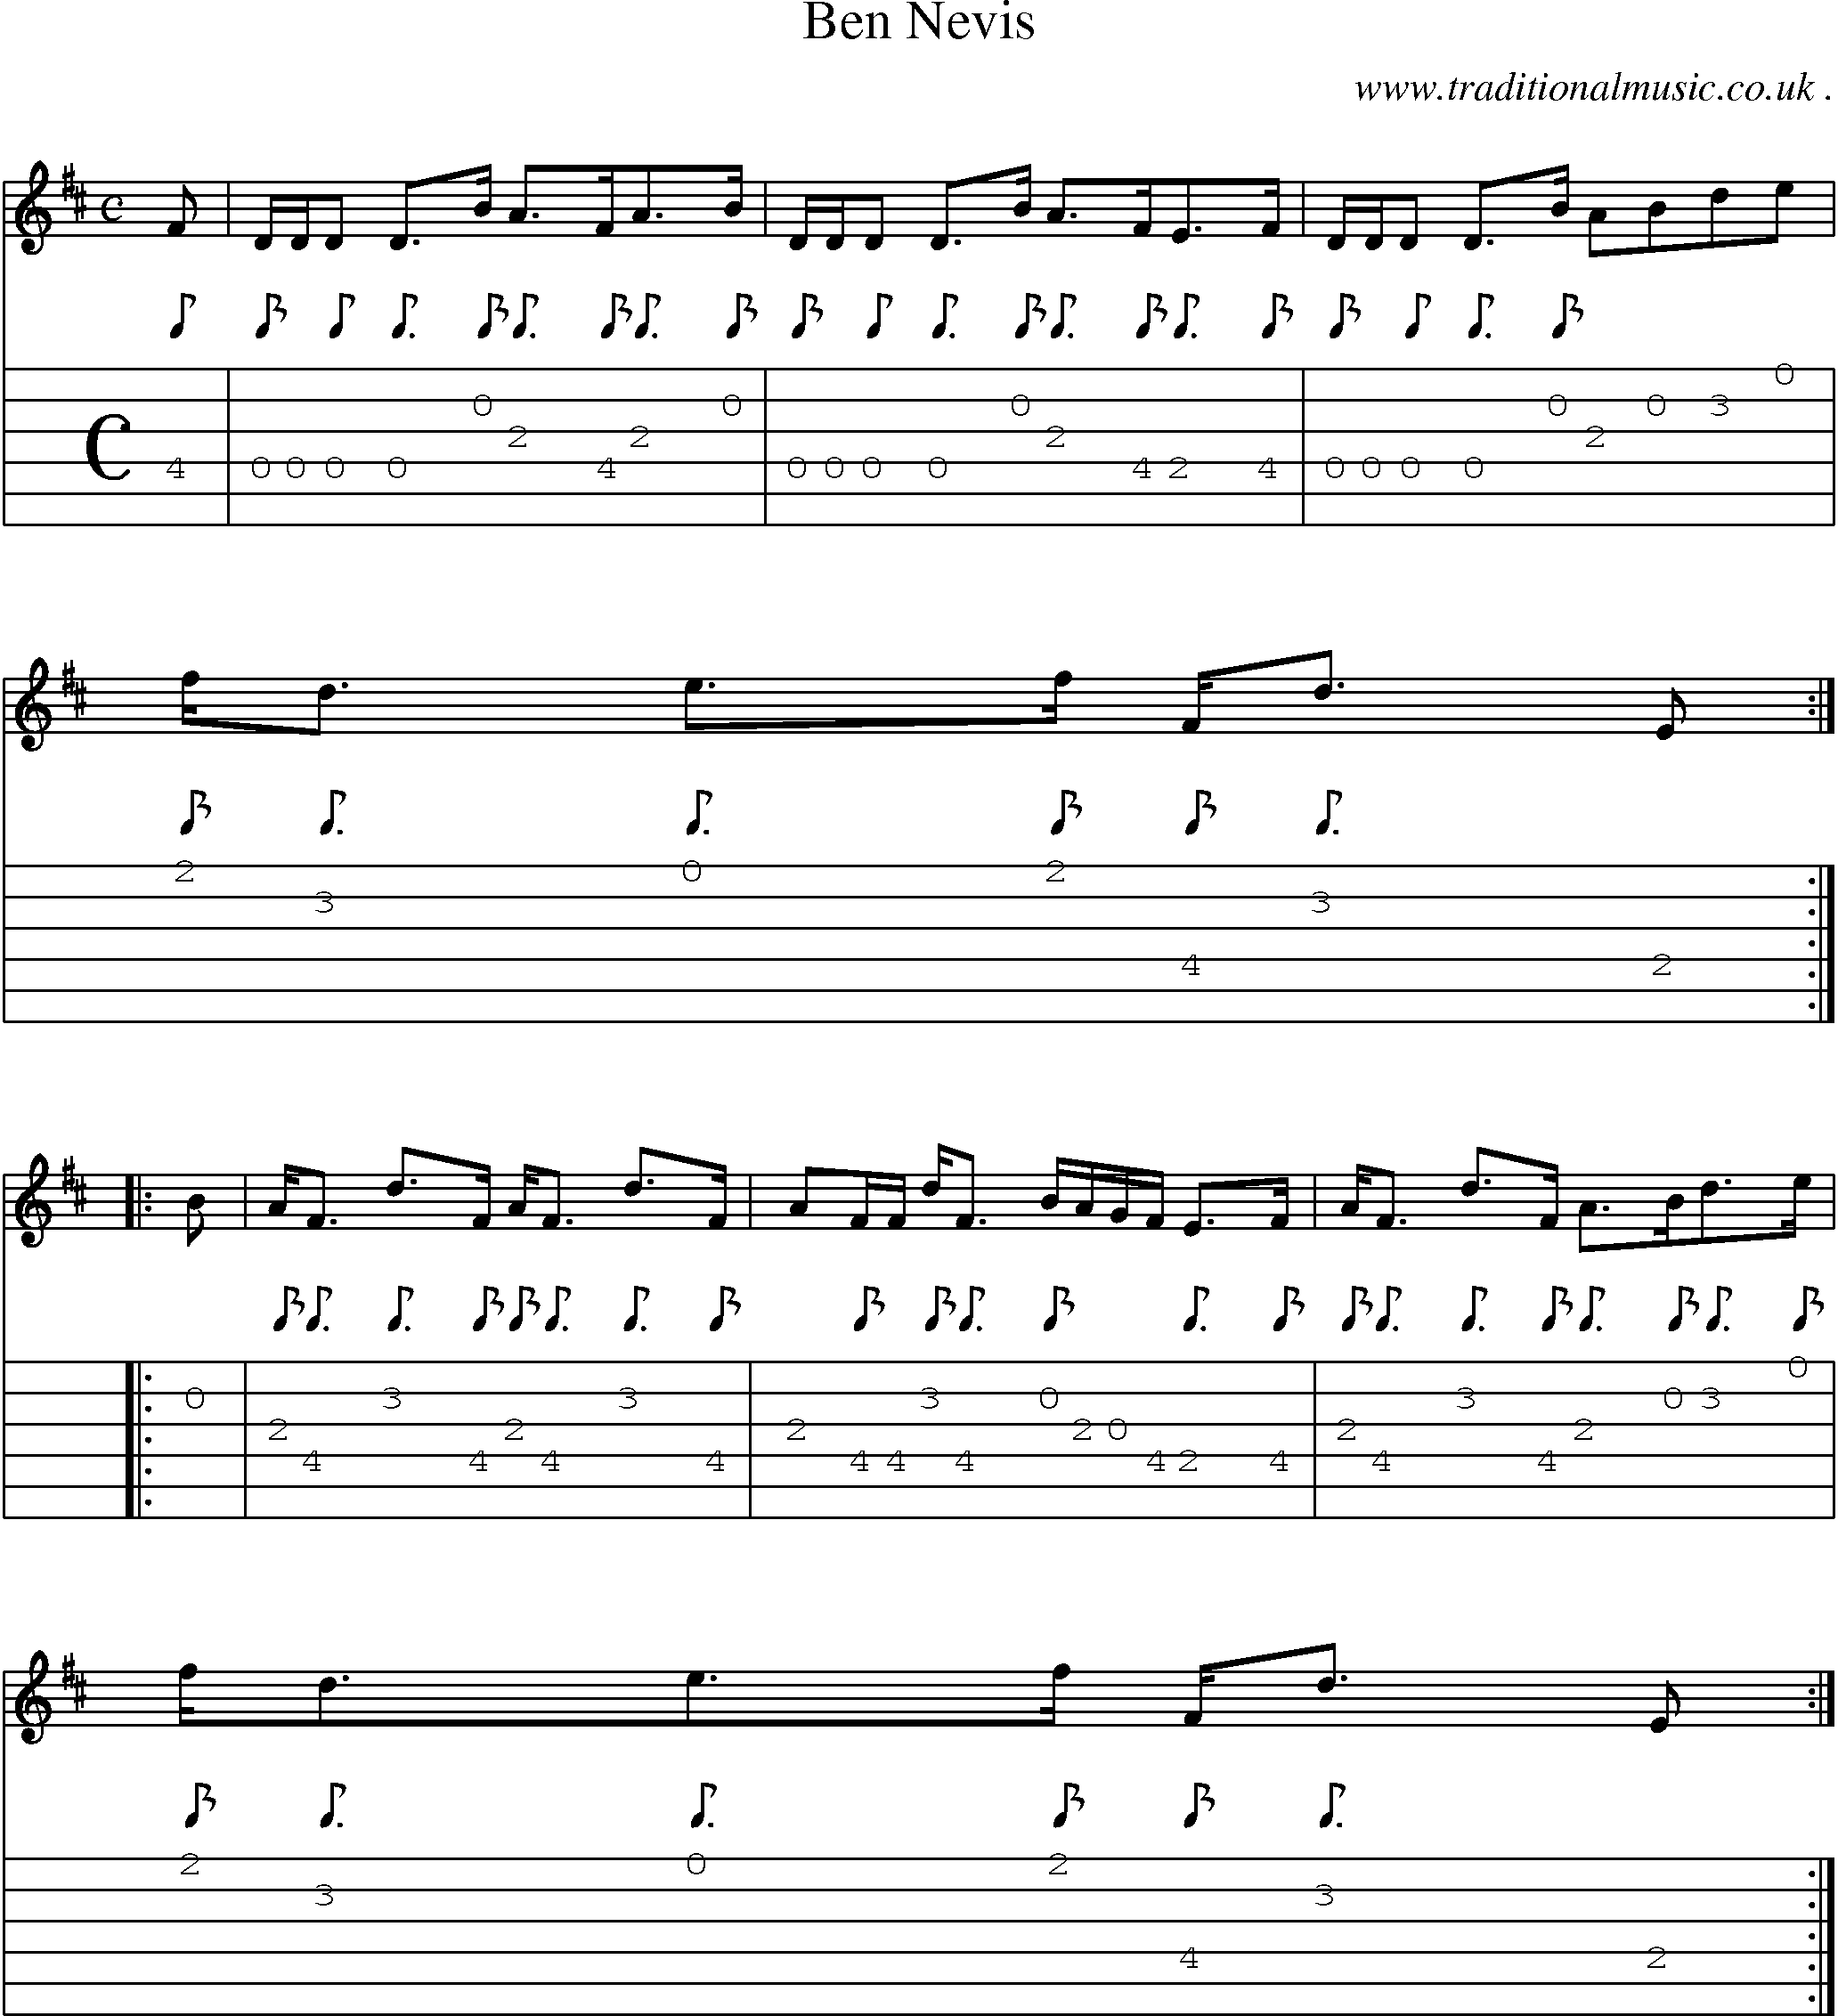 Sheet-music  score, Chords and Guitar Tabs for Ben Nevis